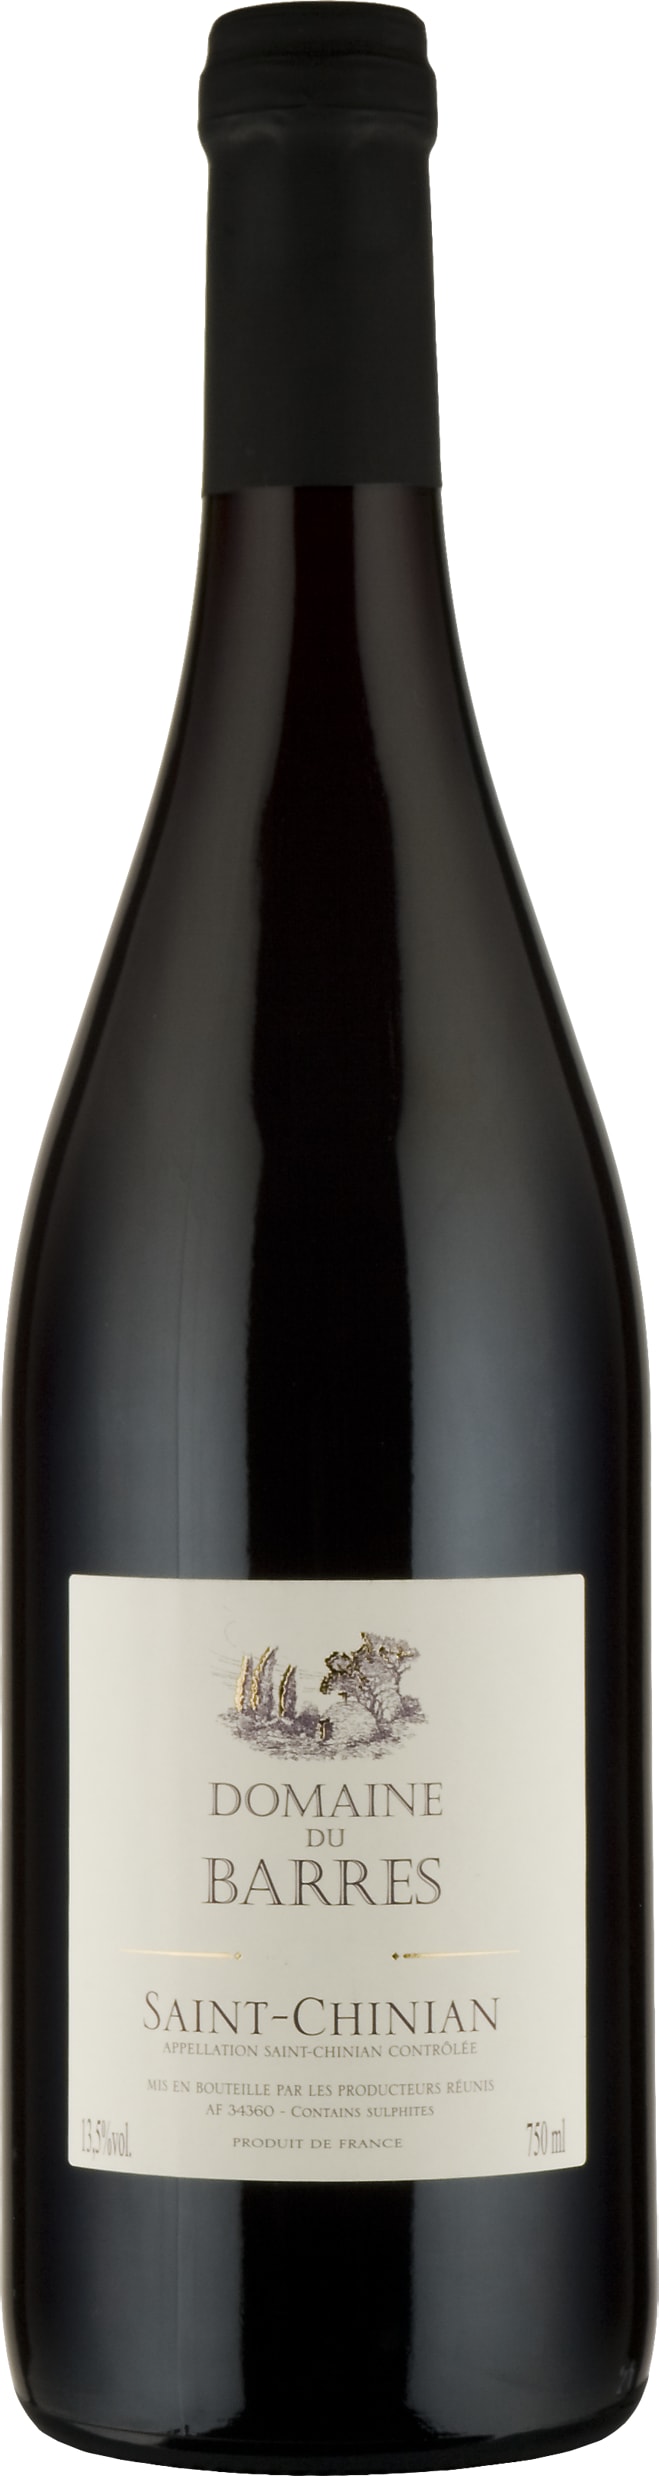 Domaine du Barres Saint-Chinian 2022 75cl - Buy Domaine du Barres Wines from GREAT WINES DIRECT wine shop